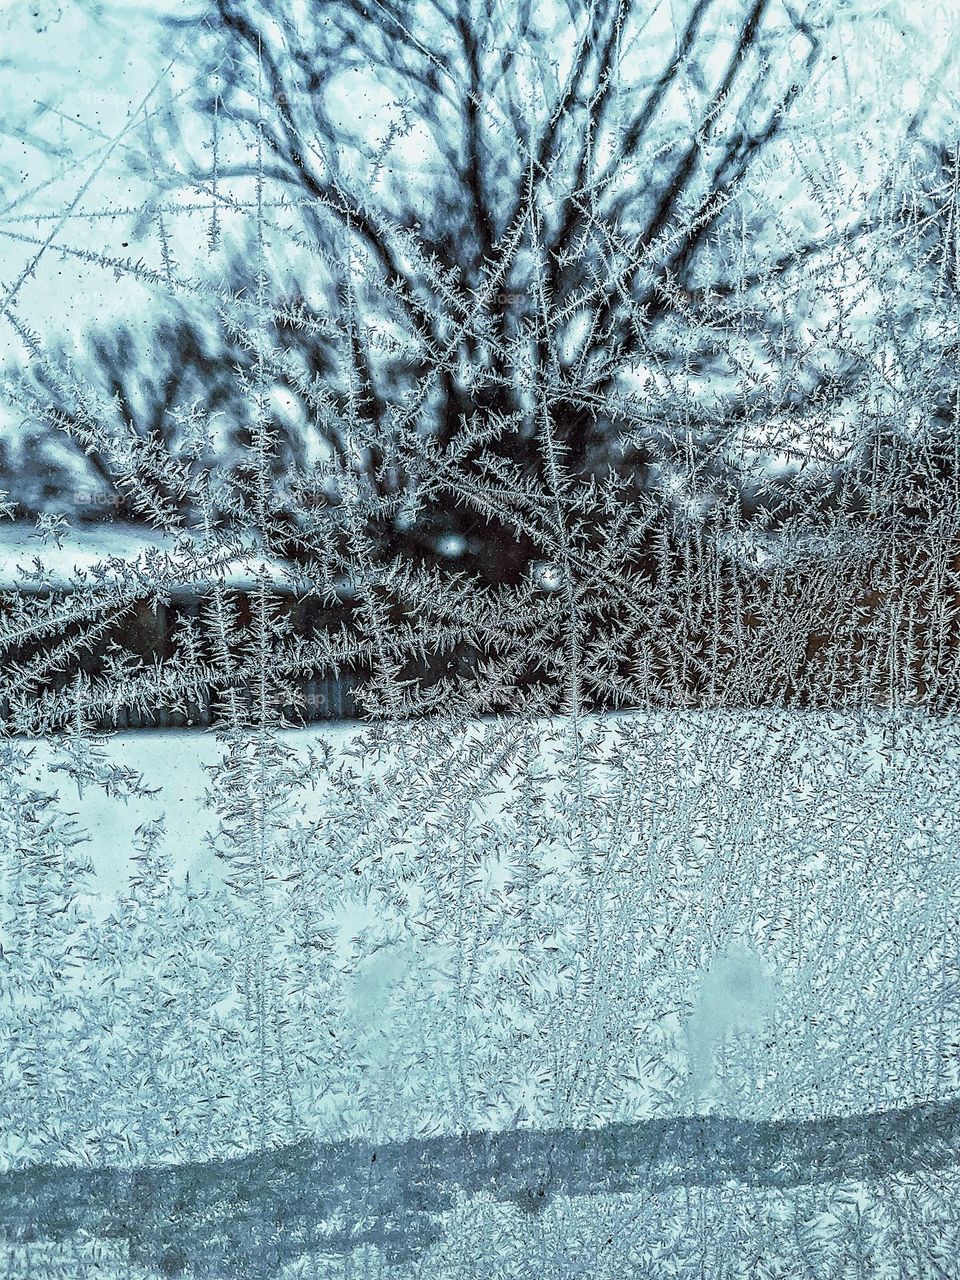 Jack Frost on the window pane, frosty designs on the window pane, abstract frost designs in the cold winter, frosty abstracts, macro shot of frost, abstract designs in nature, window pane art, fun with frost, art with nature 